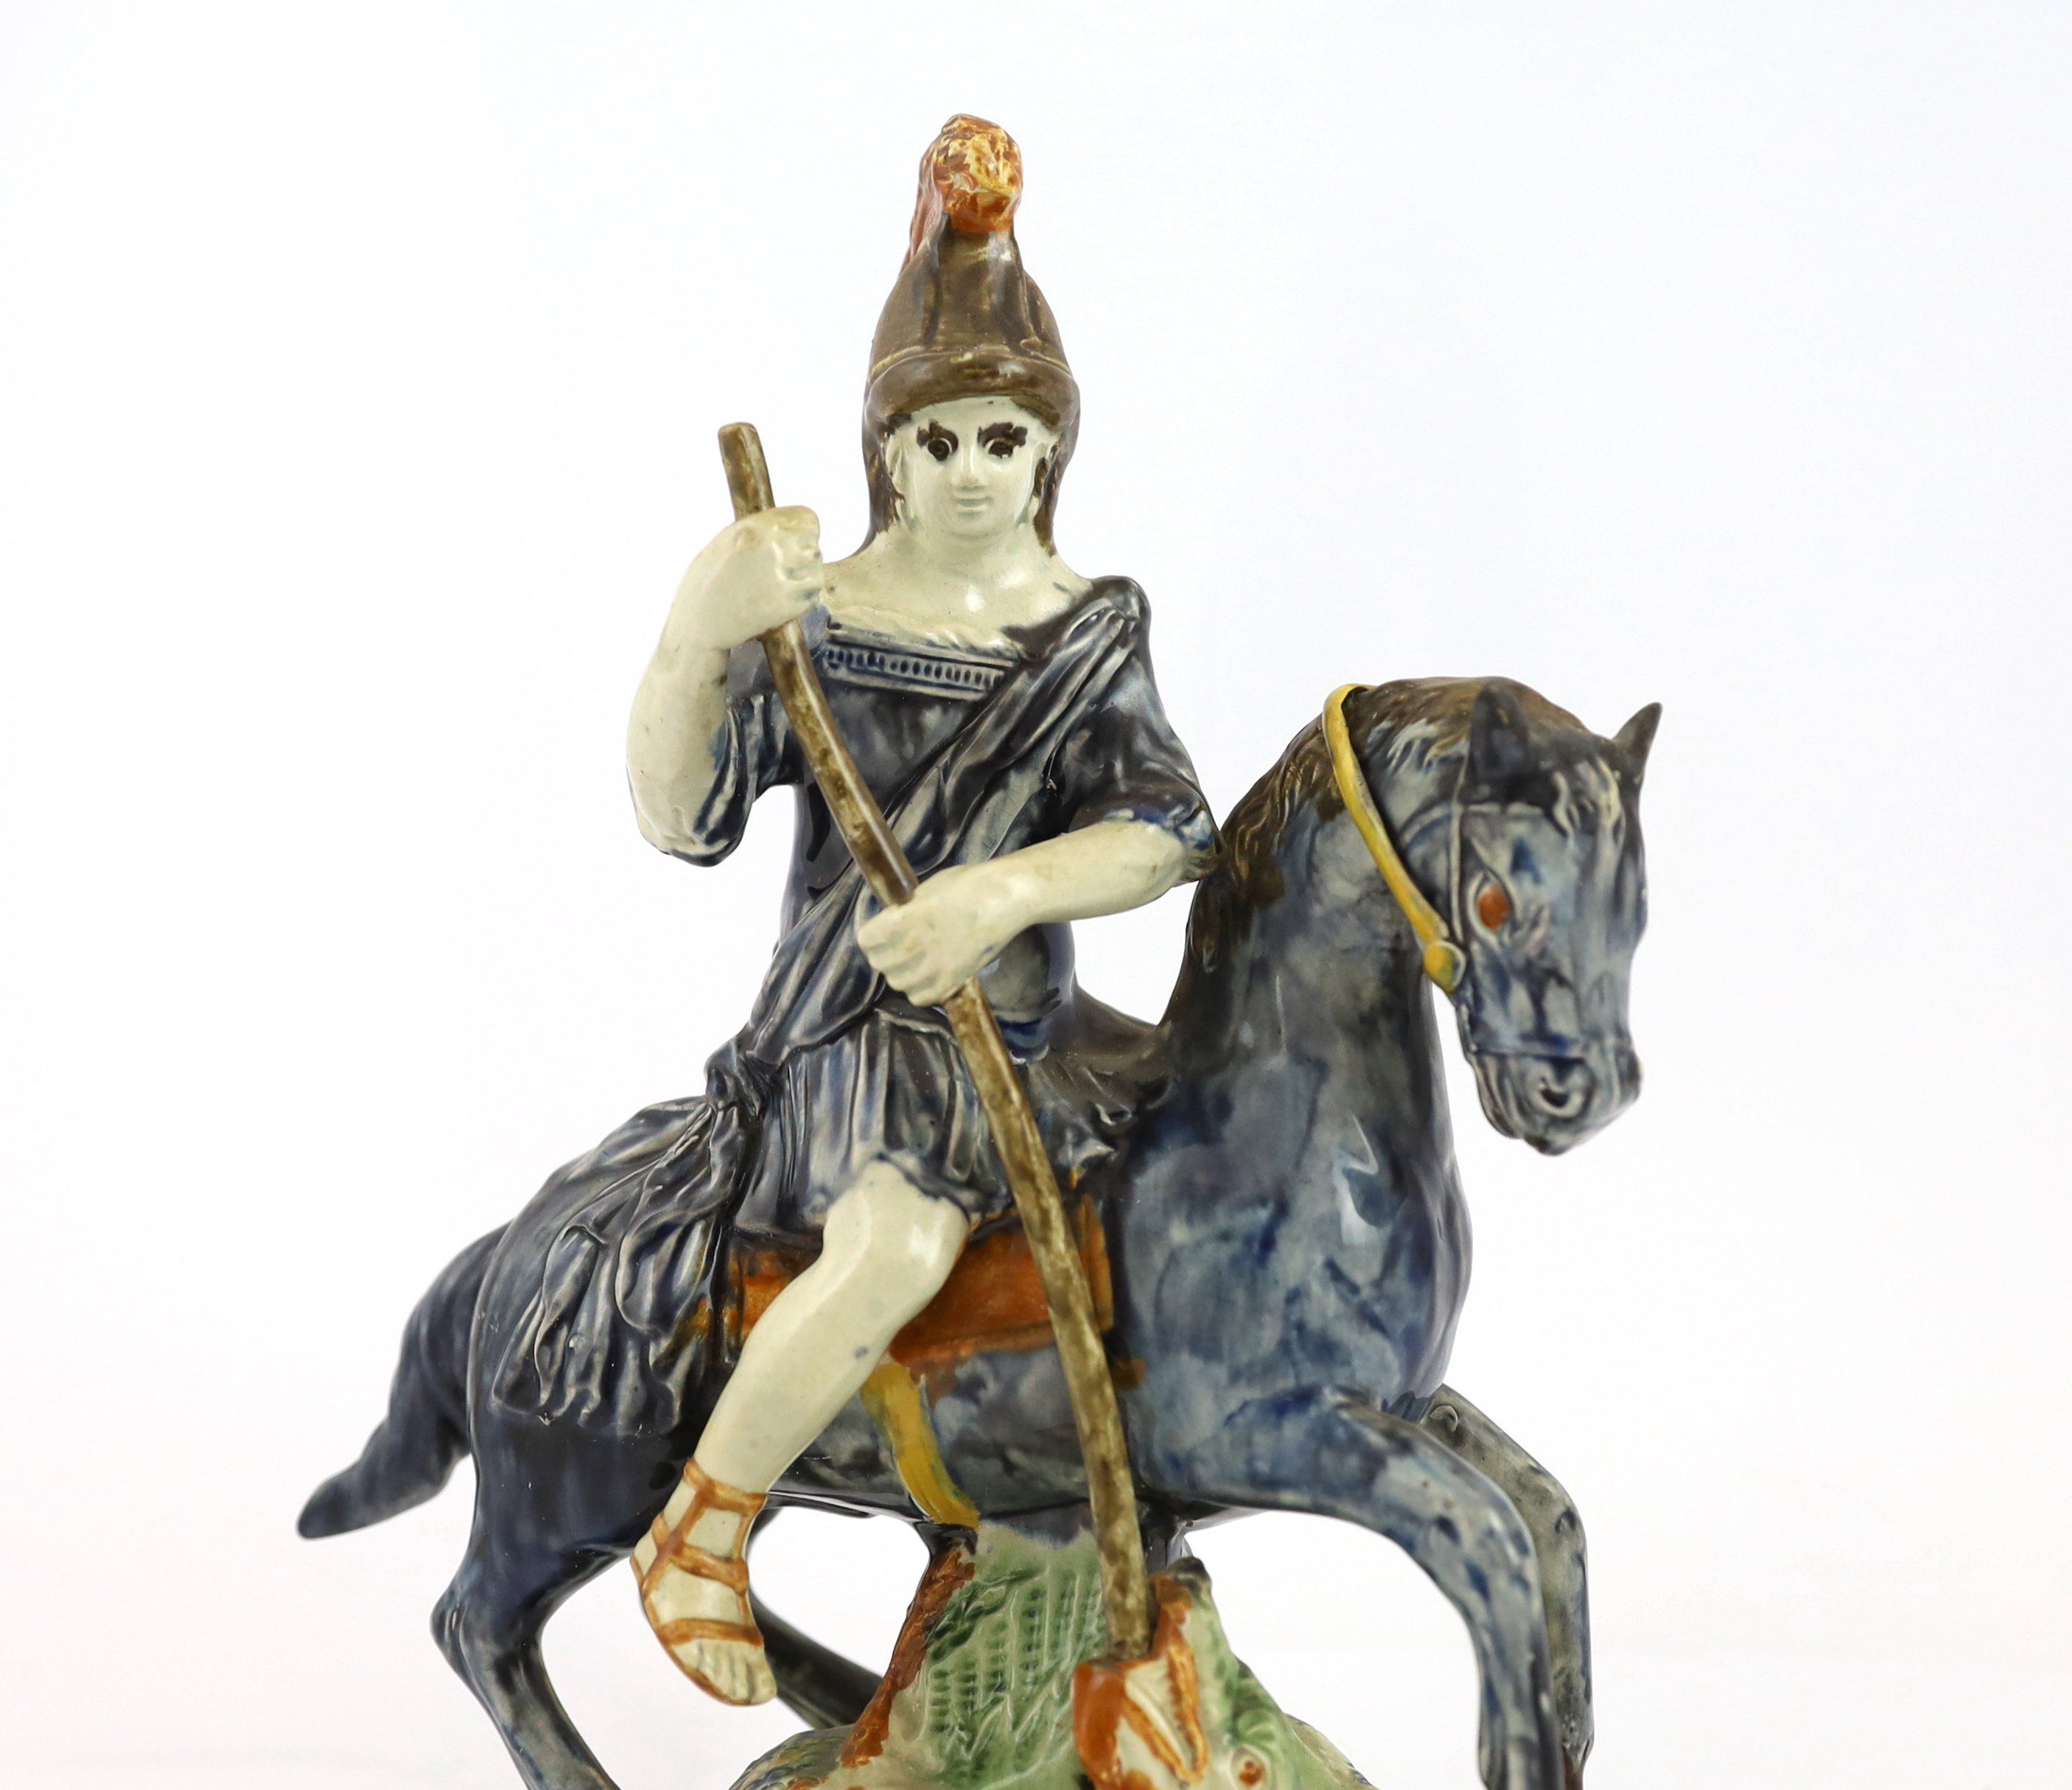 A Ralph Wood group of St. George & The Dragon, c.1795, some restoration